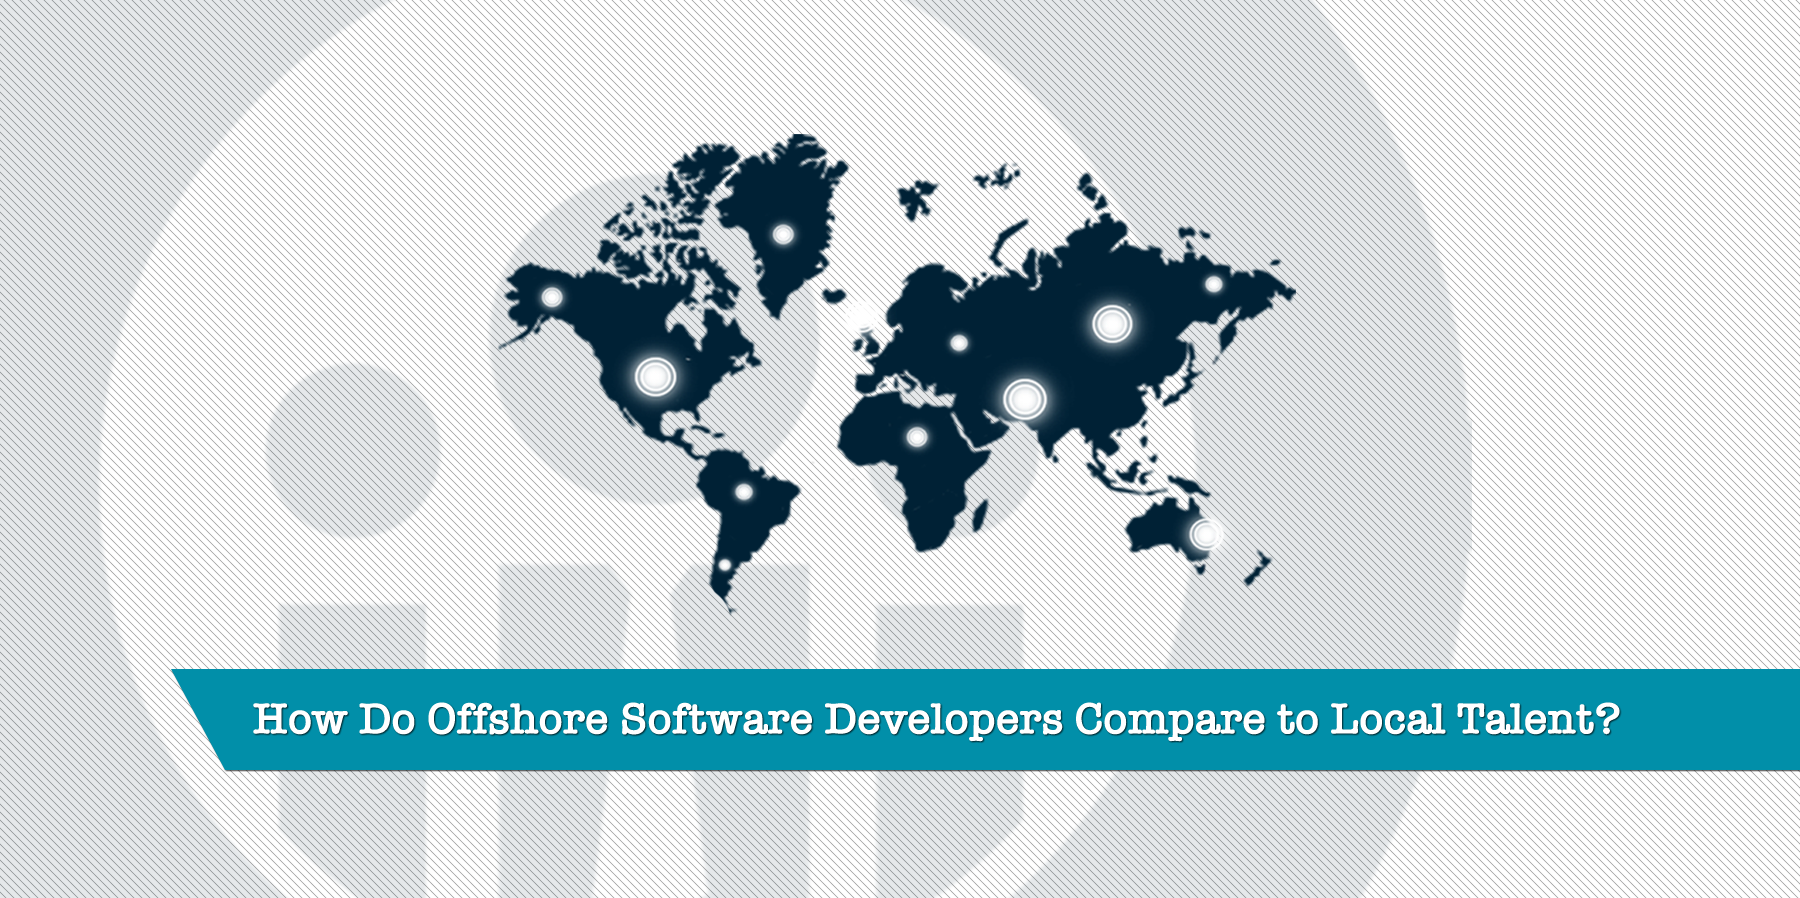 How Do Offshore Software Developers Compare to Local Talent